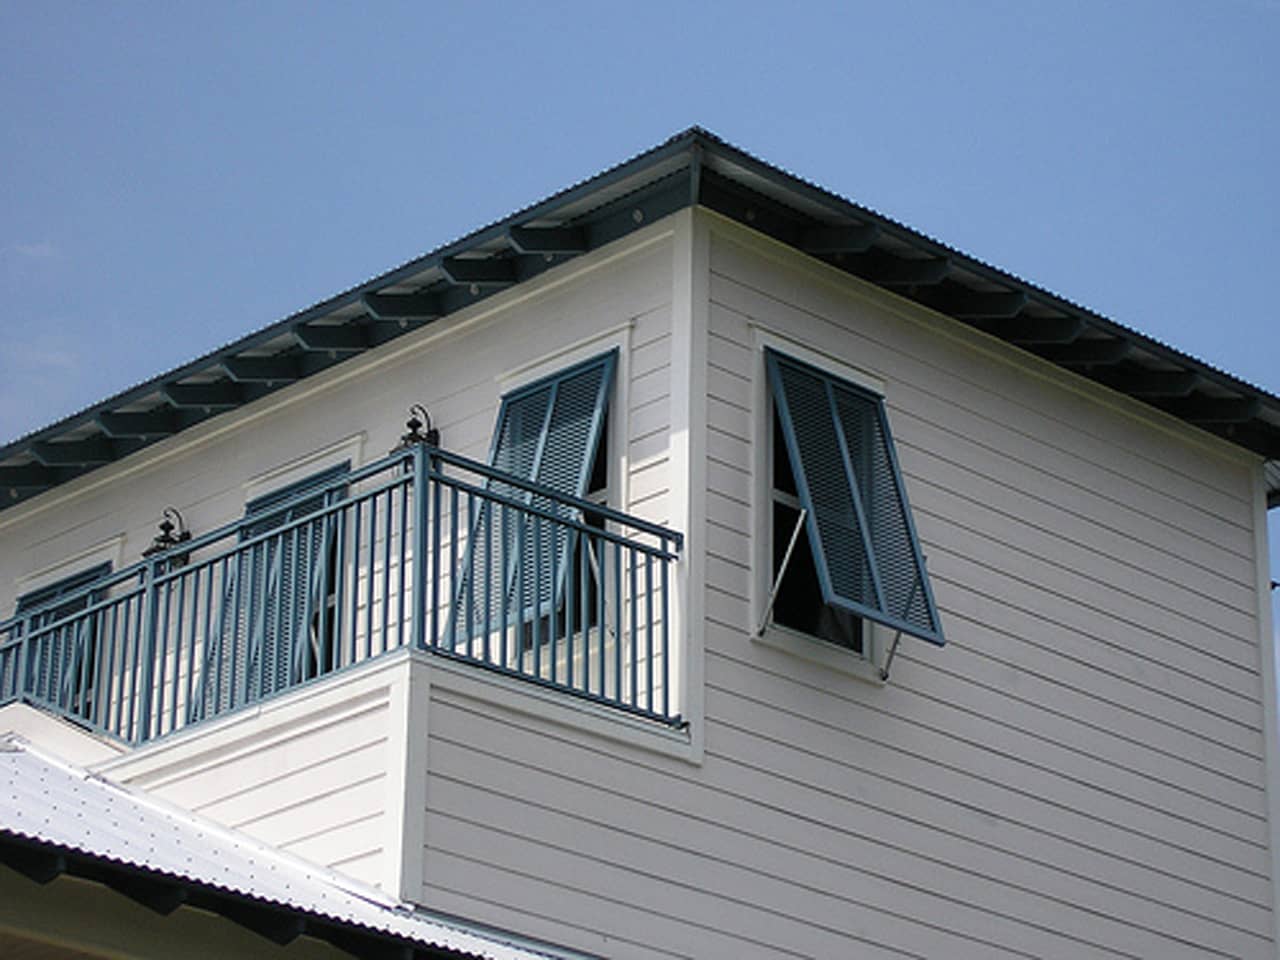 Bahama shutters on second story of a house